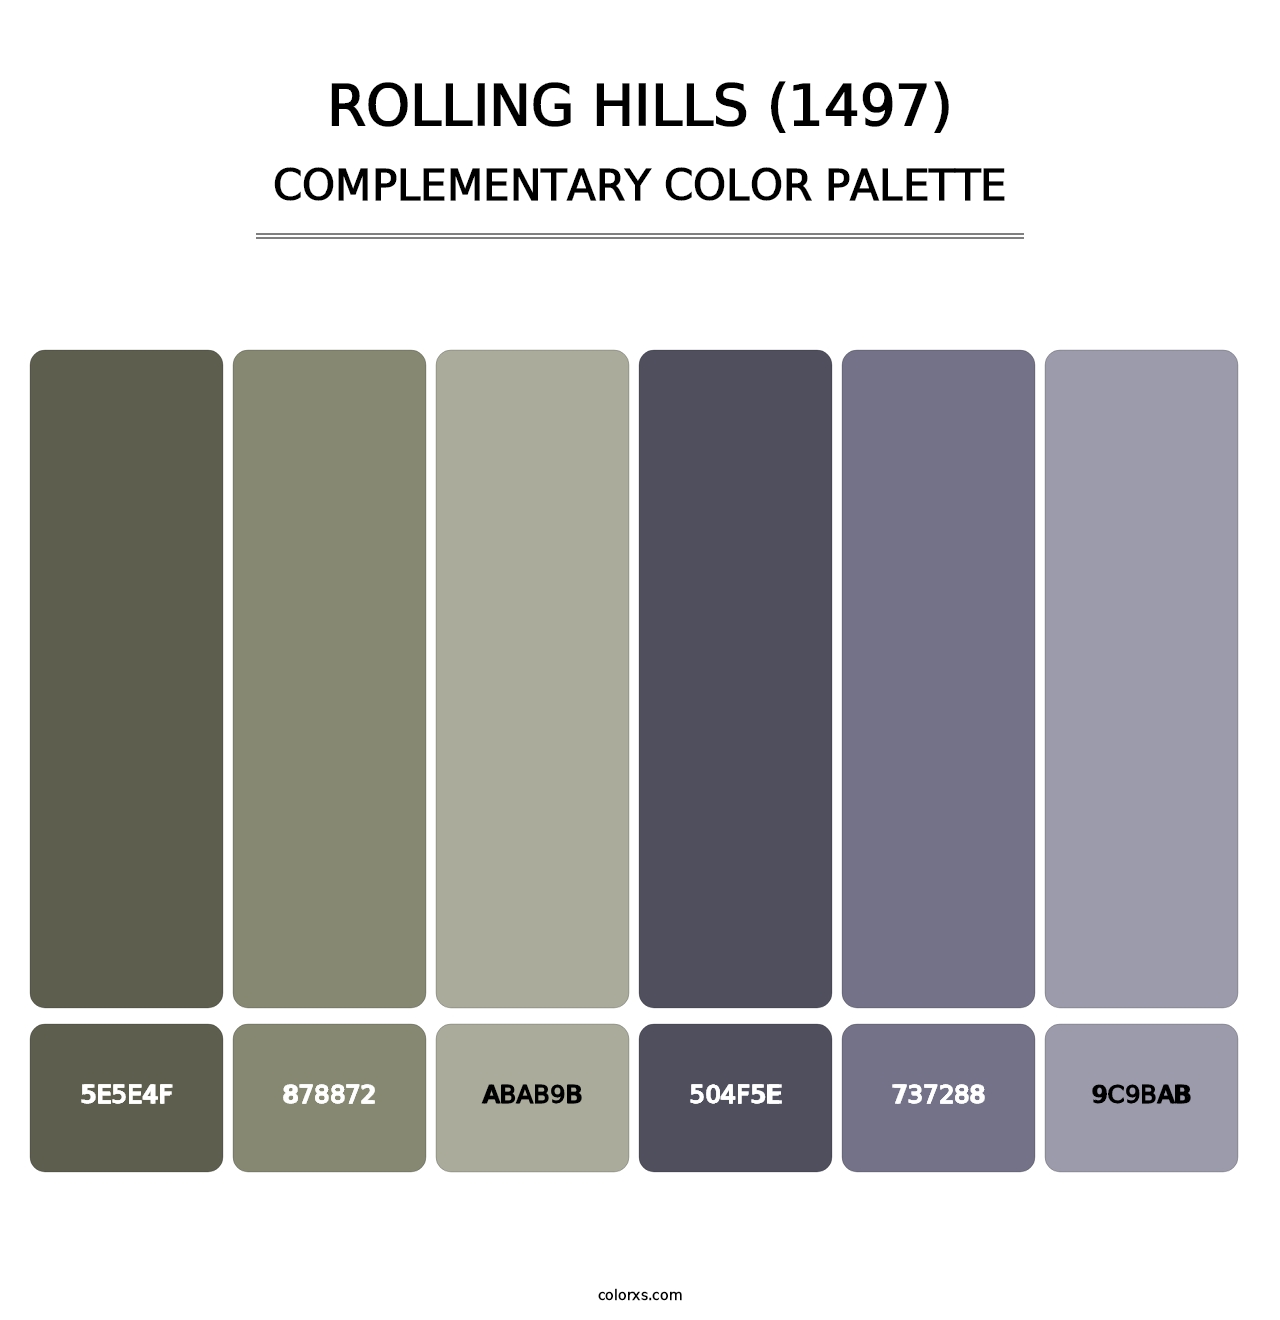 Rolling Hills (1497) - Complementary Color Palette